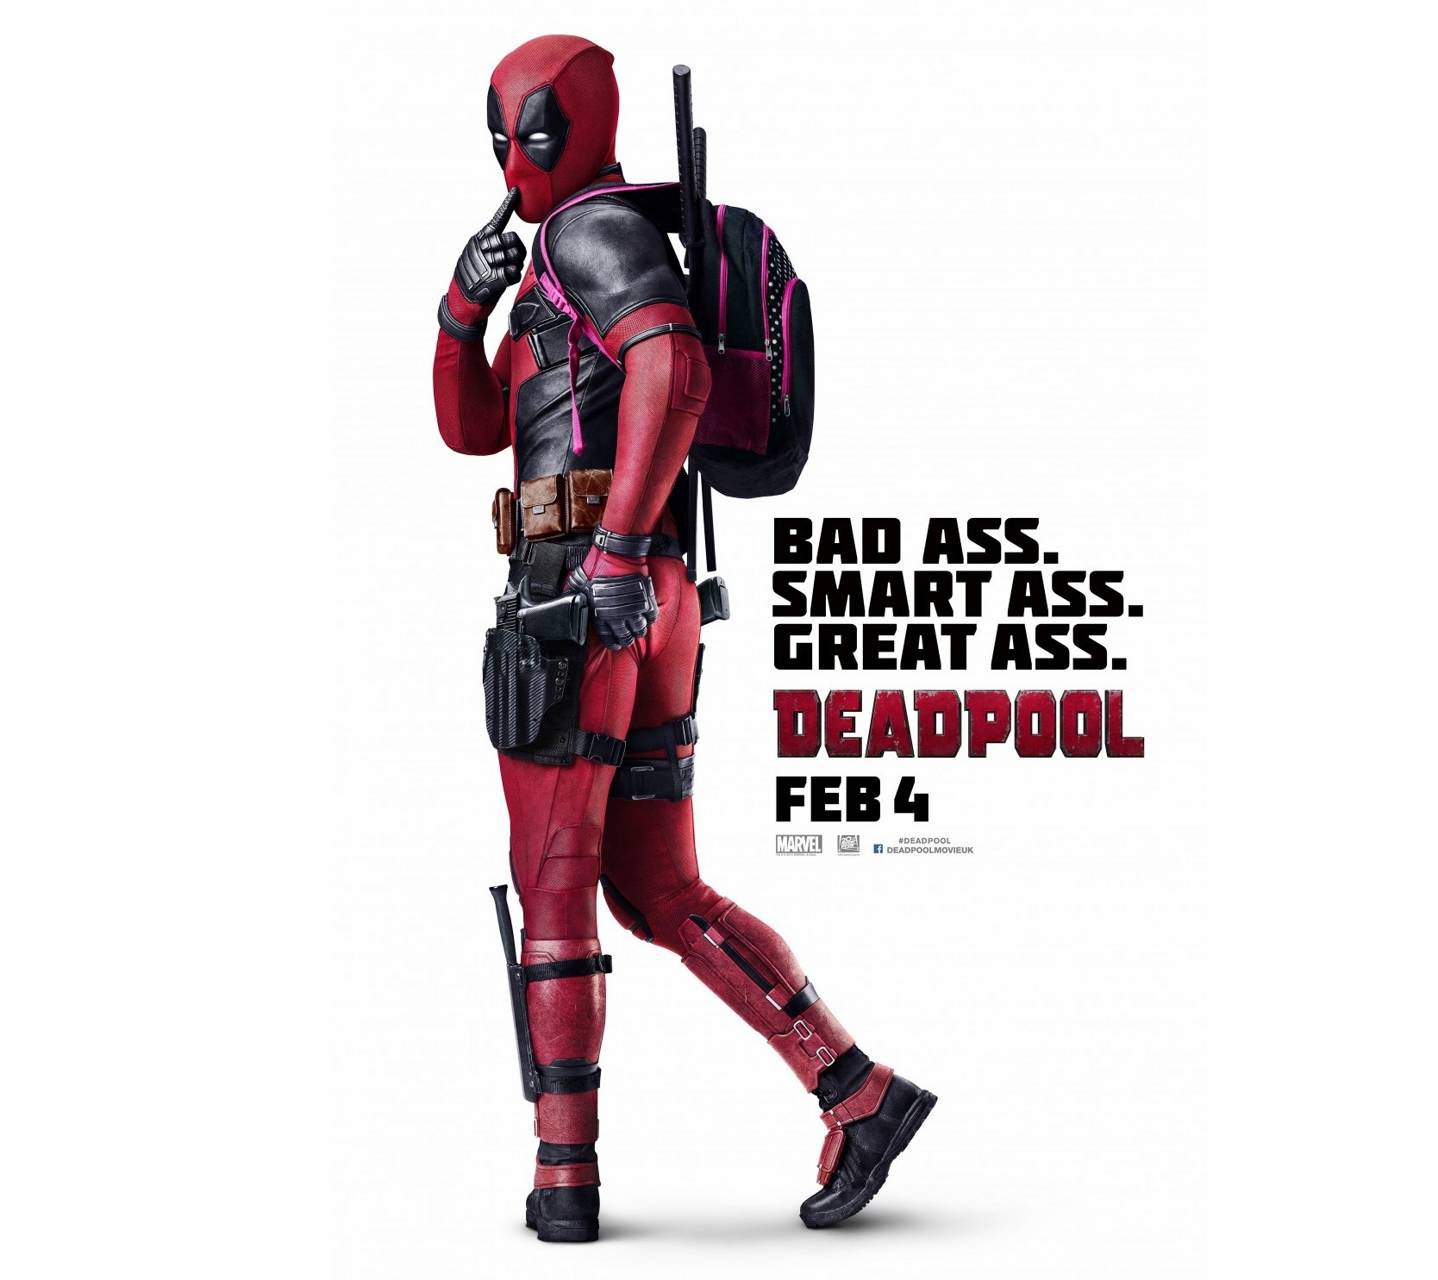 Download Free Badass Wallpapers For Your Mobile Phone - Deadpool Film , HD Wallpaper & Backgrounds